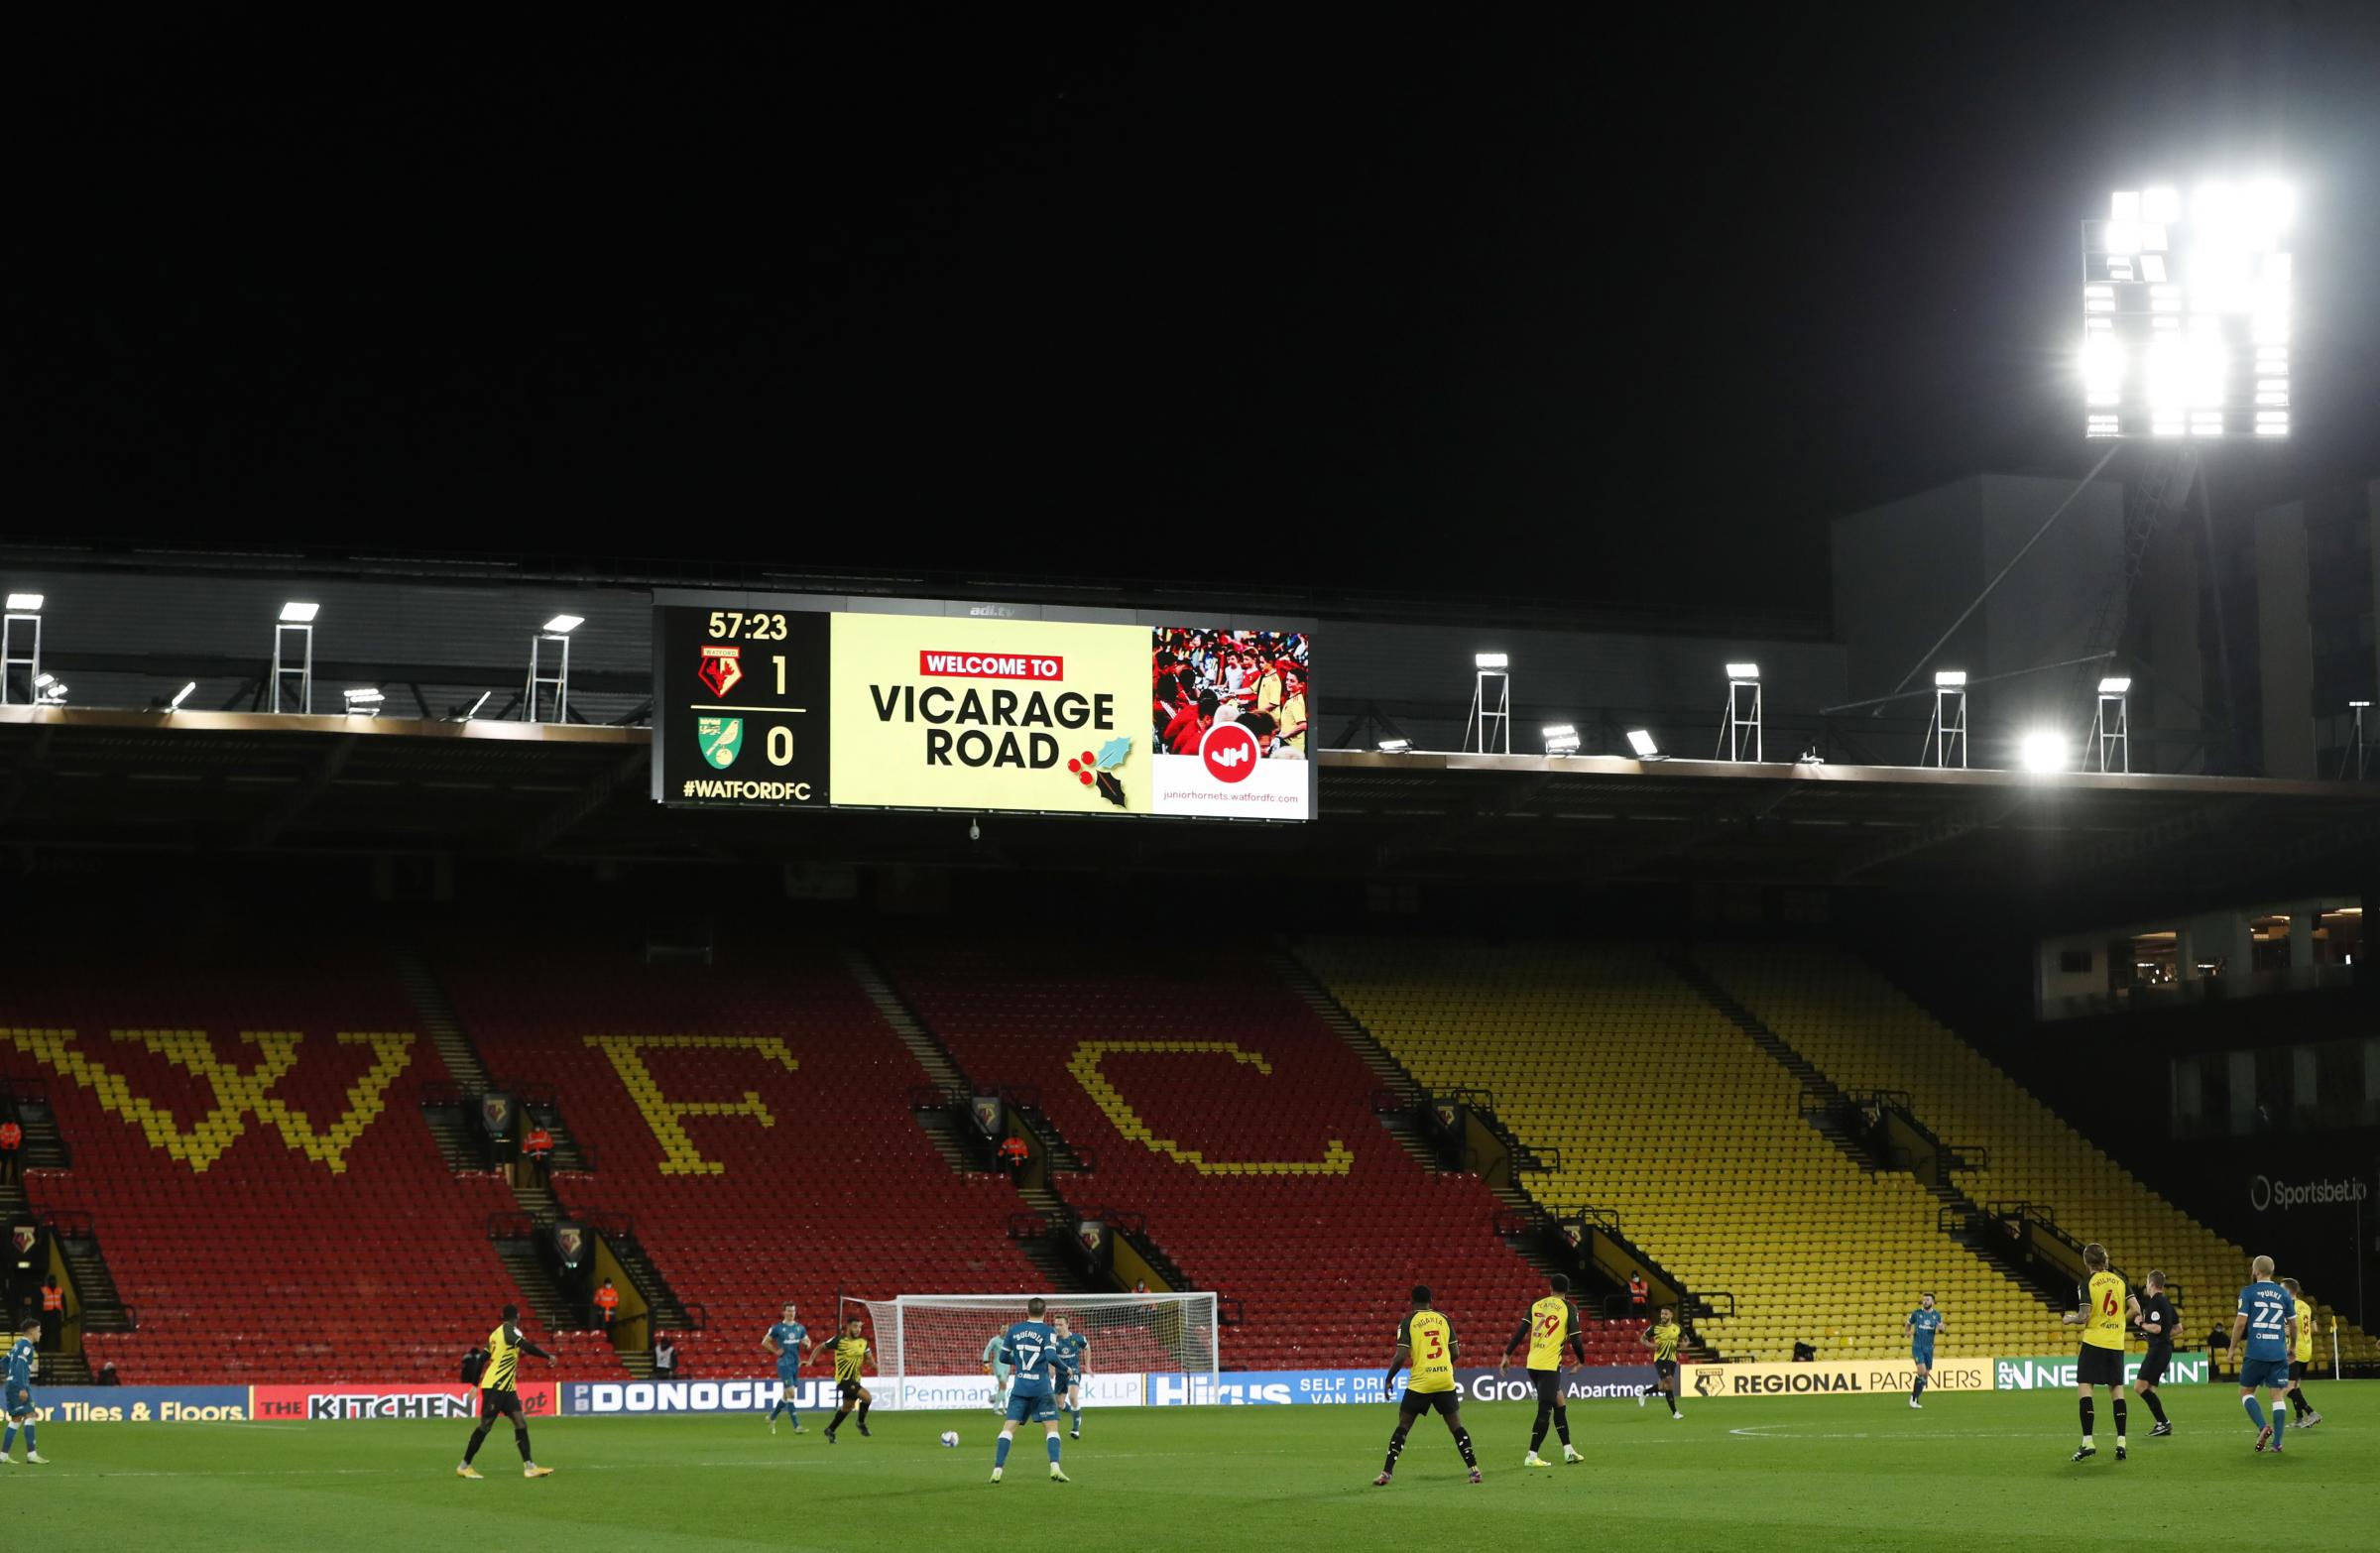 Like all clubs, Watford had to get used to playing in empty stadiums over the past year. Picture: Action Images